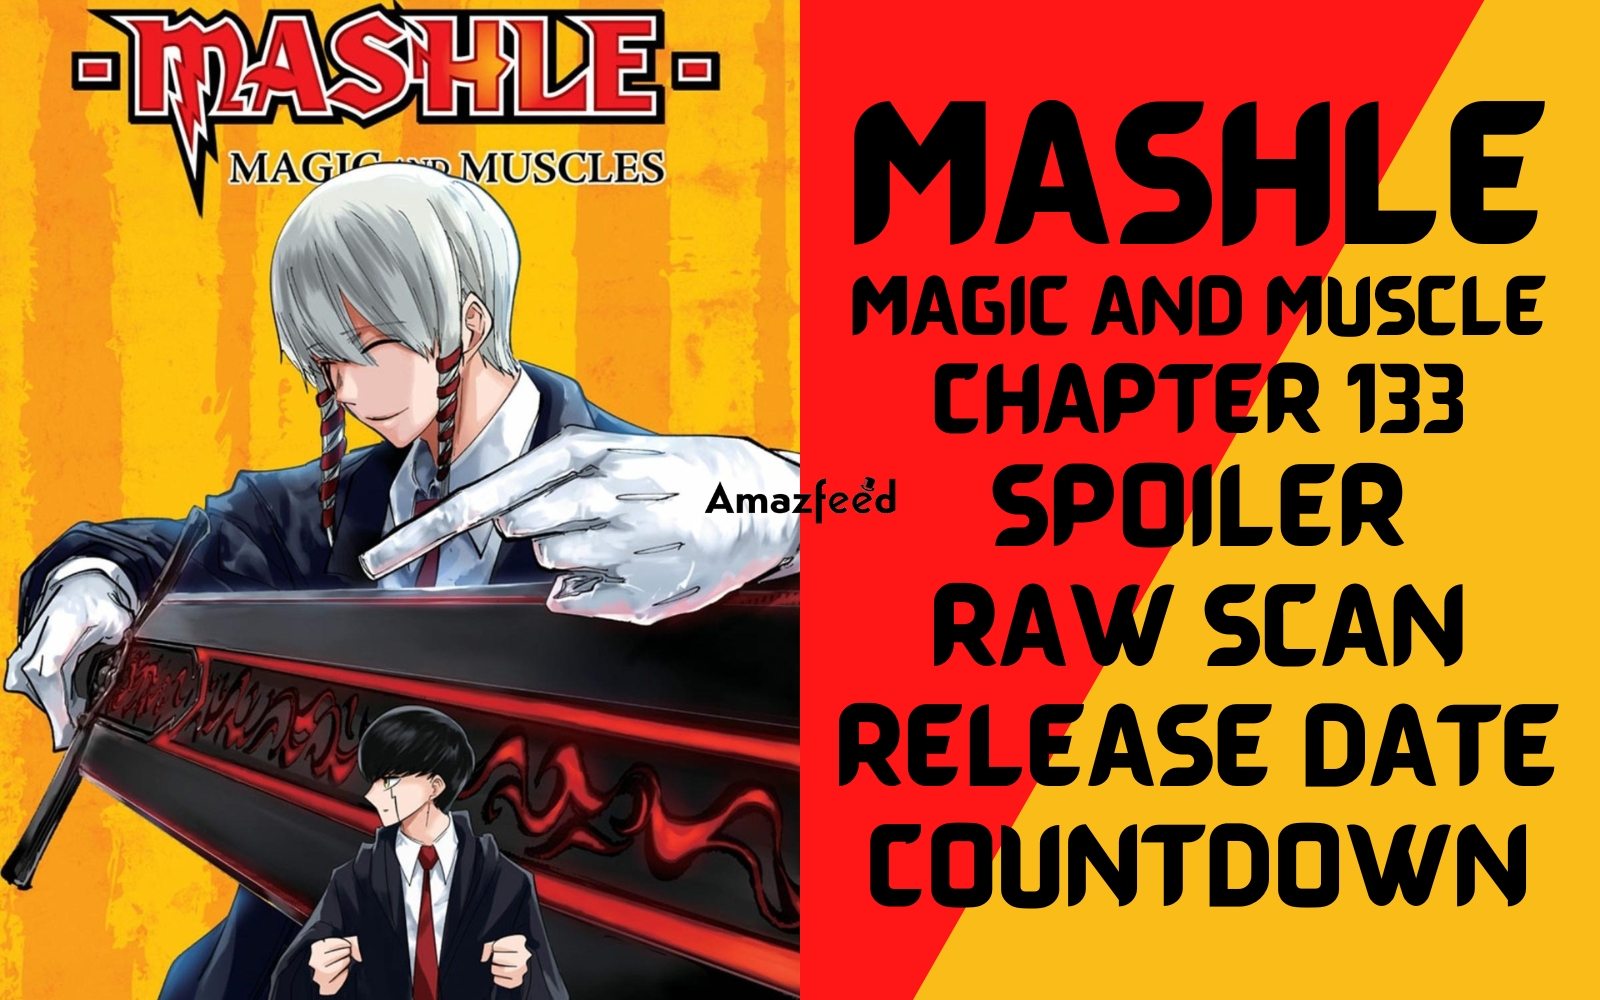 Mashle Magic And Muscle Chapter 133 Spoiler, Raw Scan, Color Page, Release Date